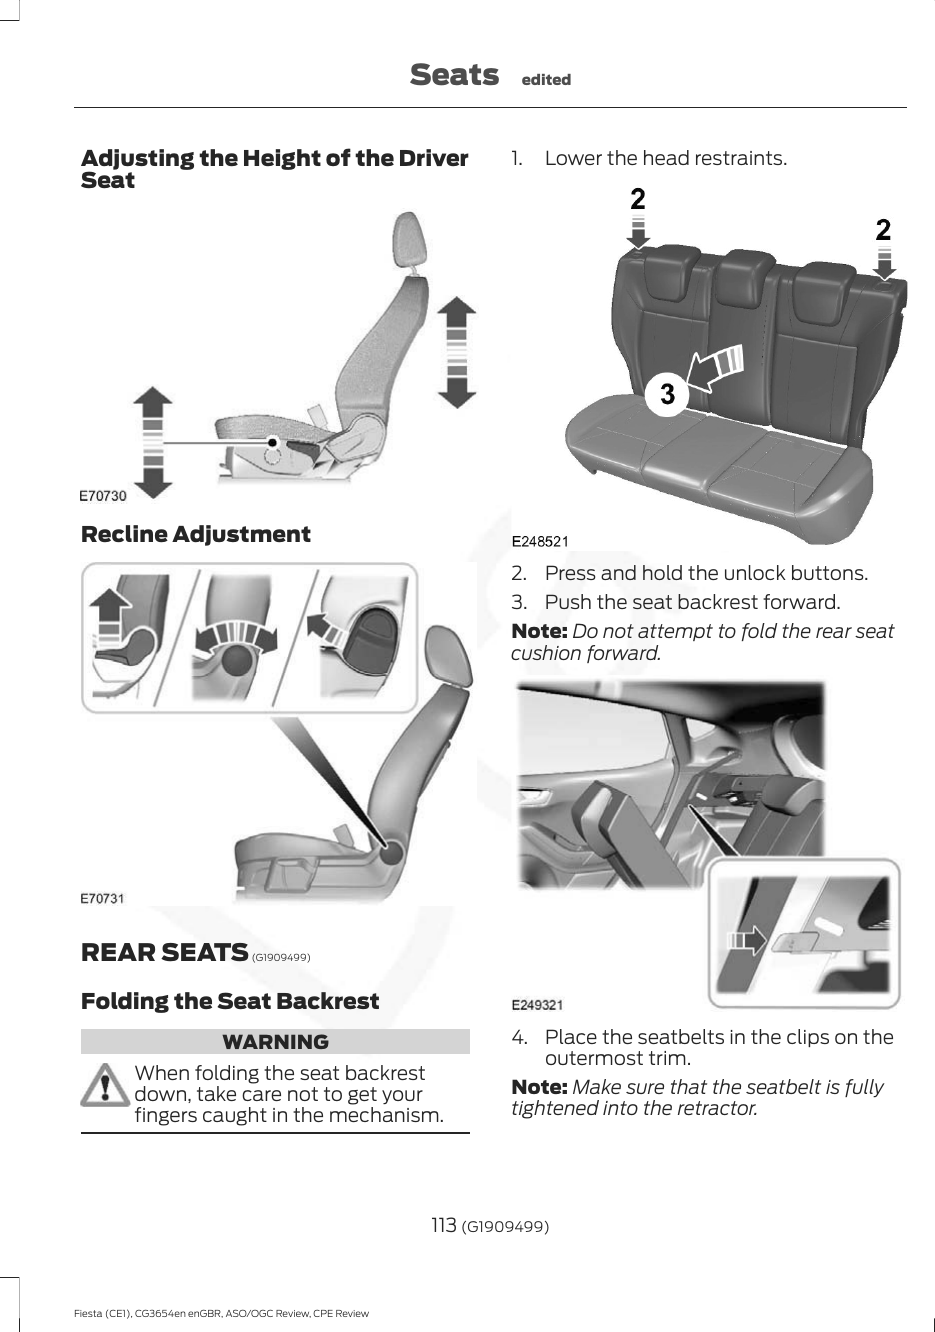 Adjusting the Height of the DriverSeatRecline AdjustmentREAR SEATS (G1909499)Folding the Seat BackrestWARNINGWhen folding the seat backrestdown, take care not to get yourfingers caught in the mechanism.1. Lower the head restraints.2. Press and hold the unlock buttons.3. Push the seat backrest forward.Note: Do not attempt to fold the rear seatcushion forward.4. Place the seatbelts in the clips on theoutermost trim.Note: Make sure that the seatbelt is fullytightened into the retractor.113 (G1909499)Fiesta (CE1), CG3654en enGBR, ASO/OGC Review, CPE ReviewSeats edited